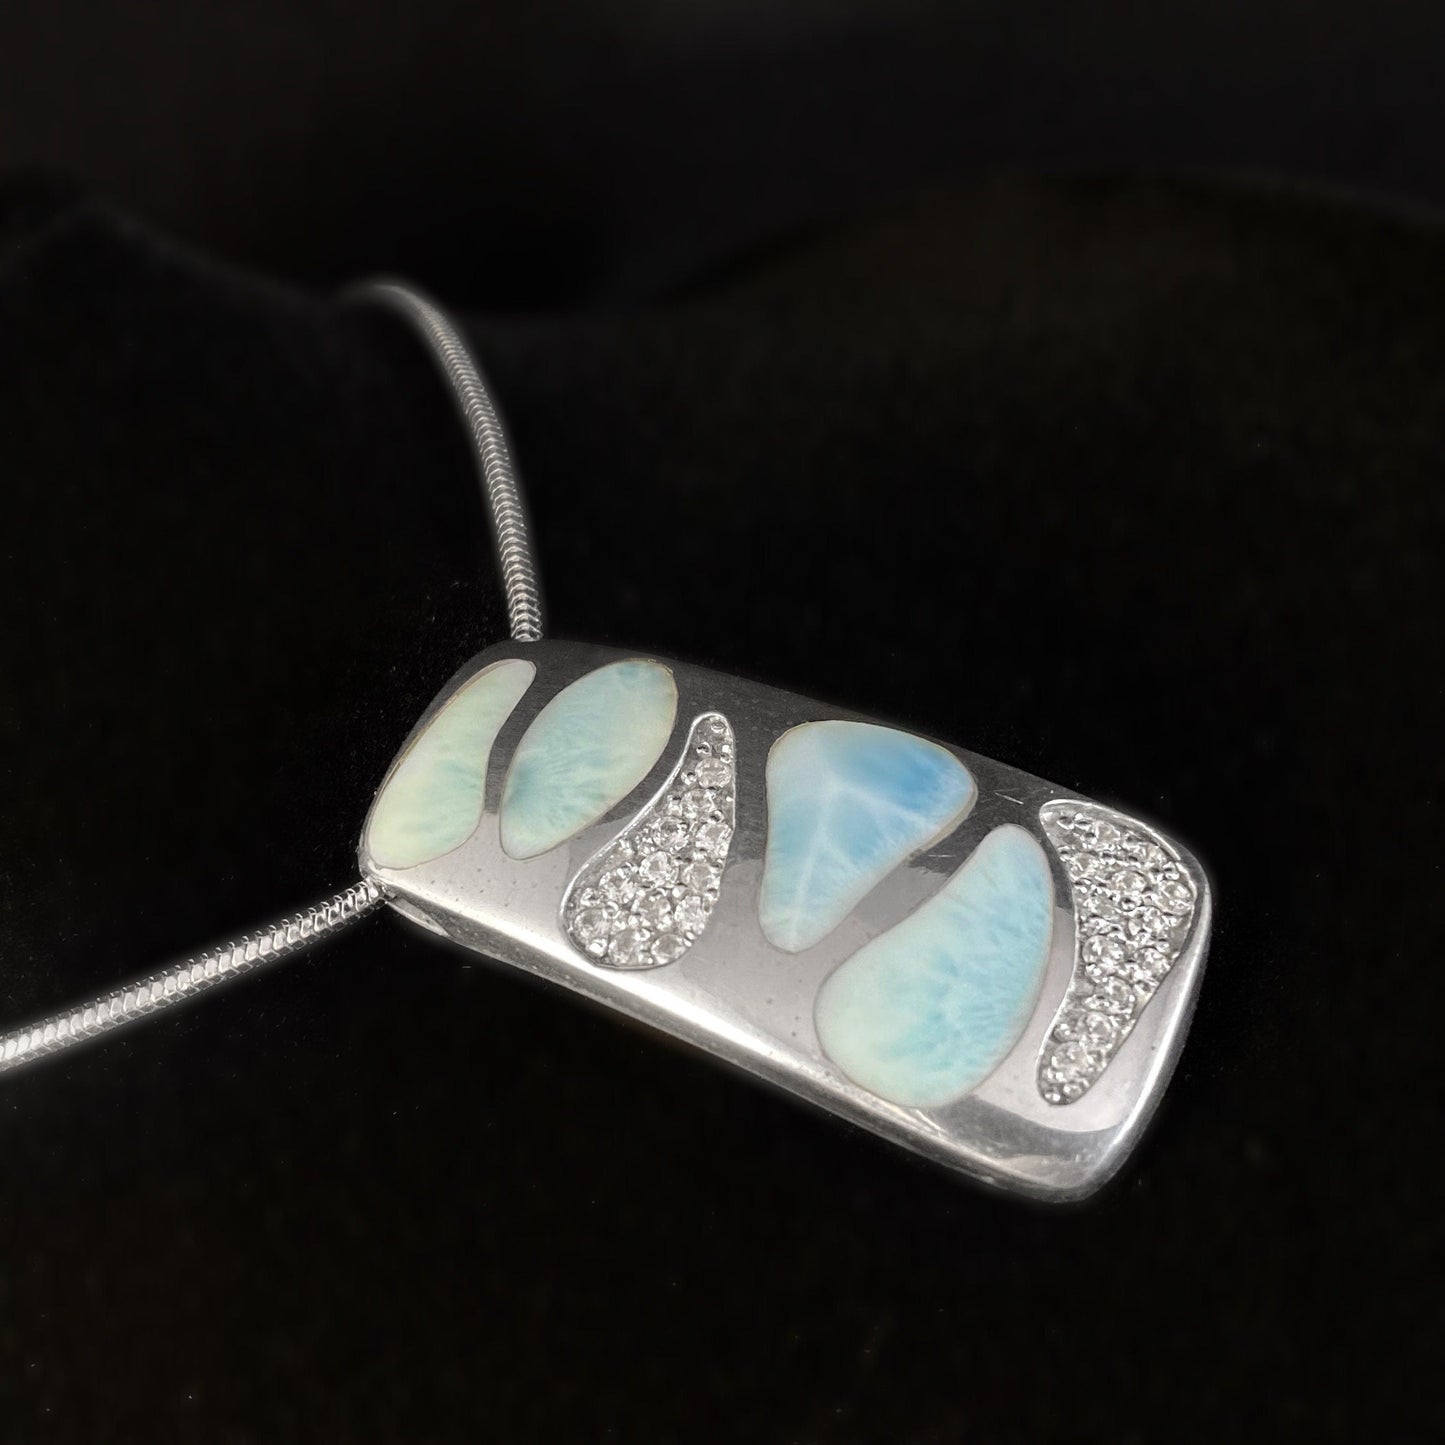 Marahlago Larimar and Sterling Silver Surf Necklace